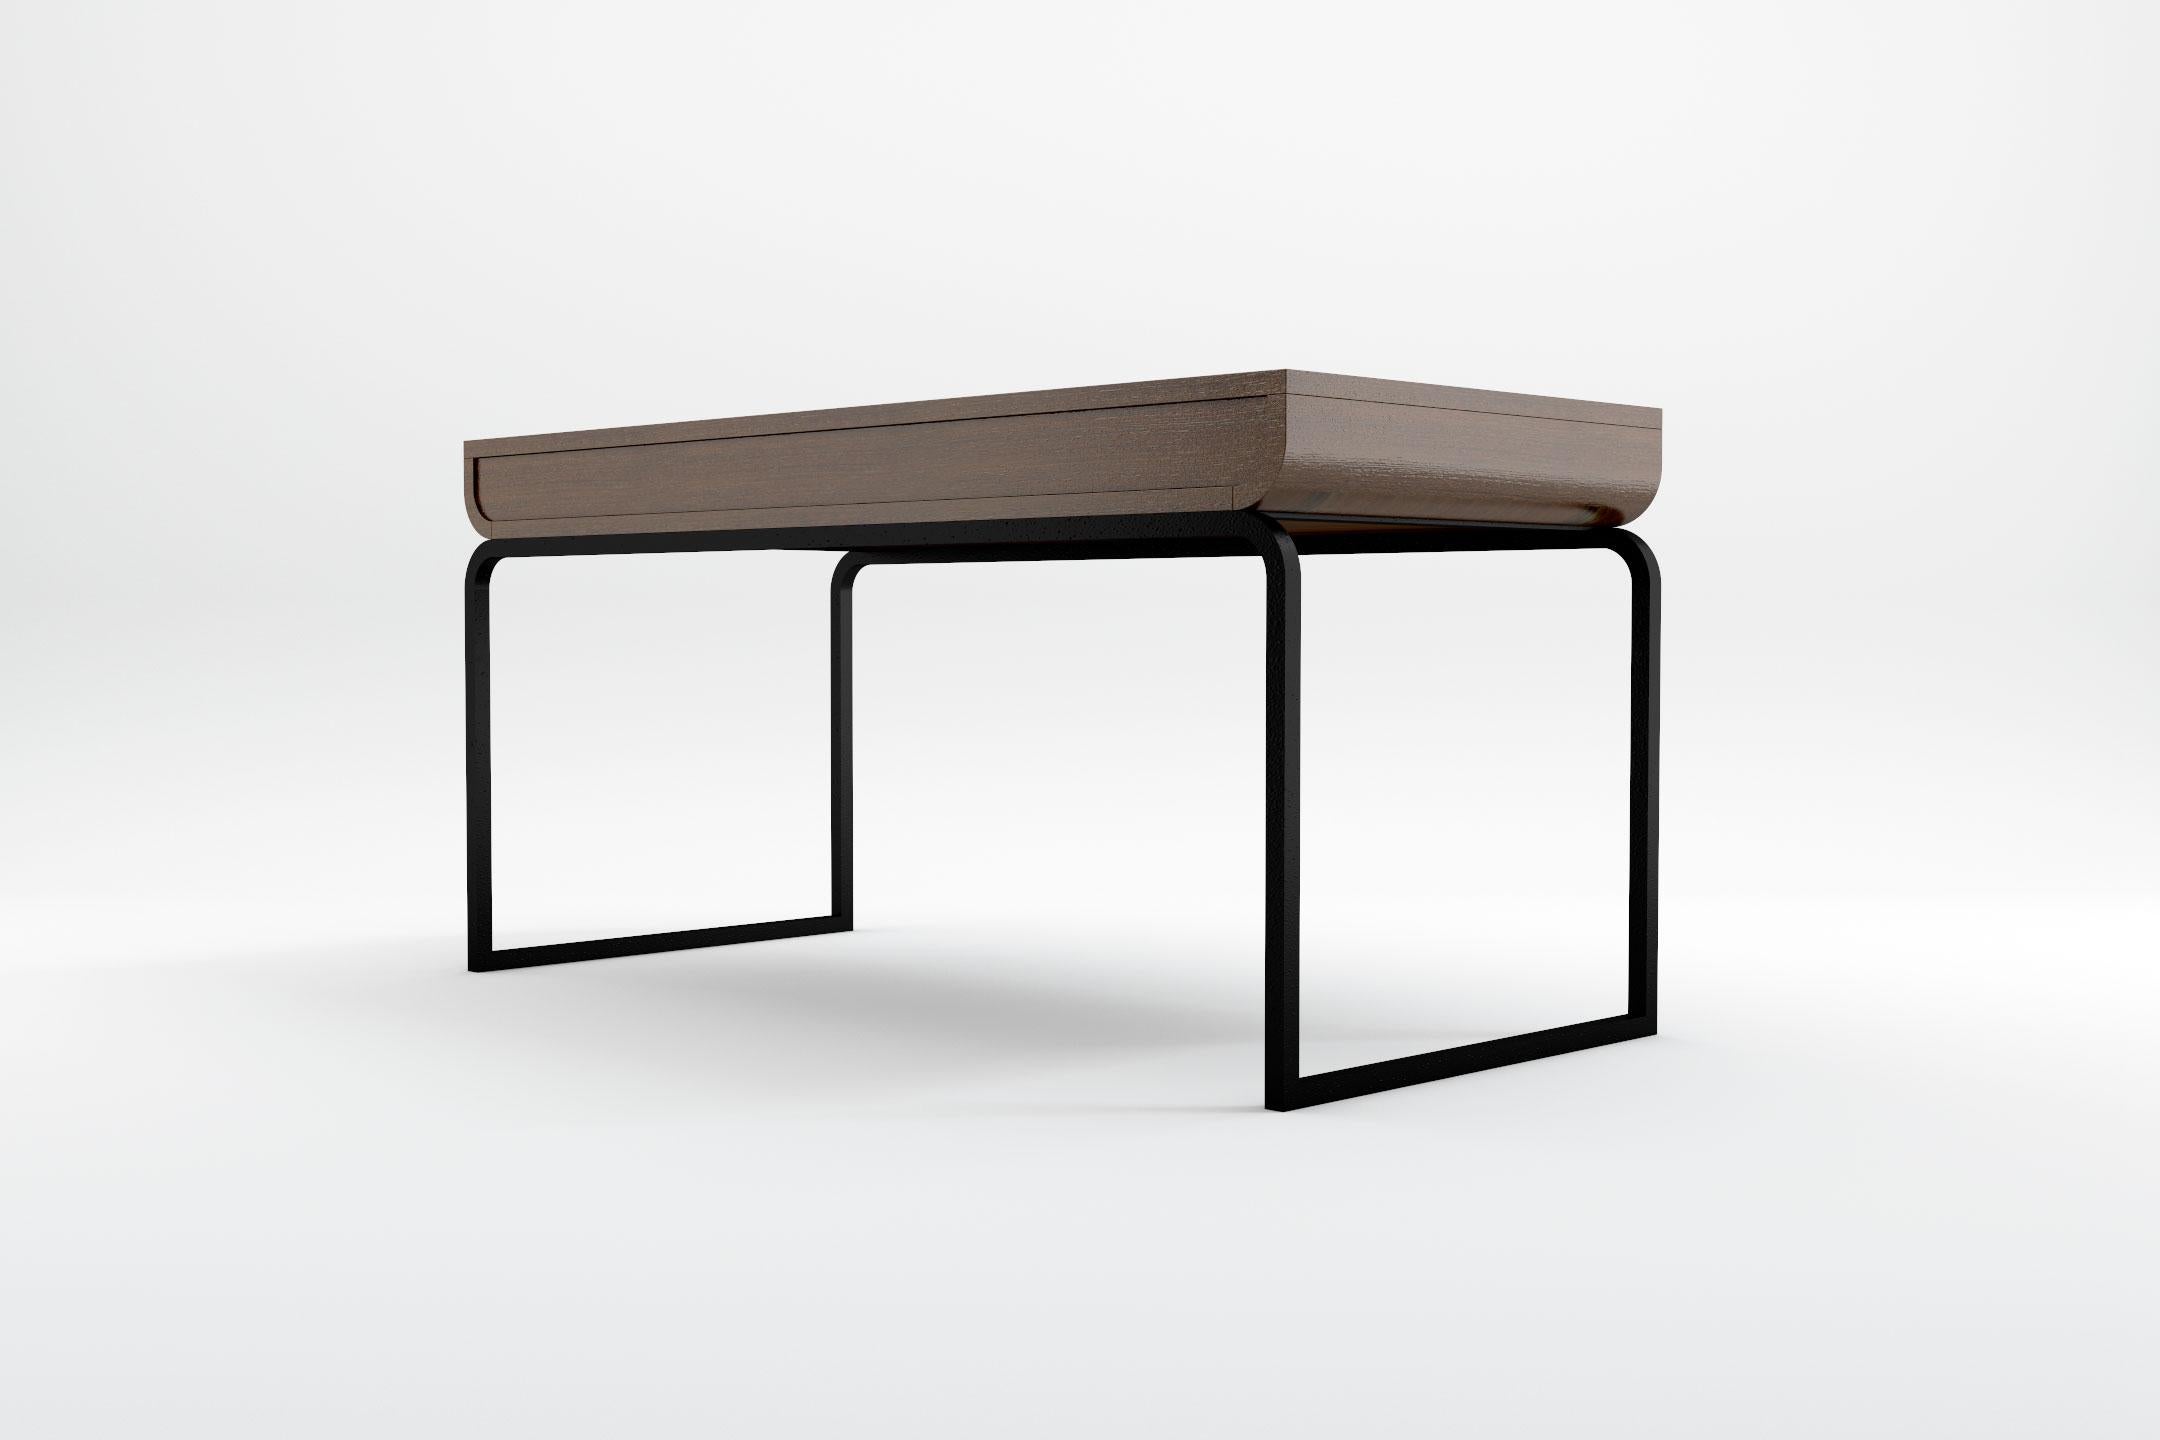 European Raw Desk - Modern Desk in Natural Wenge with Wrought Iron Base For Sale